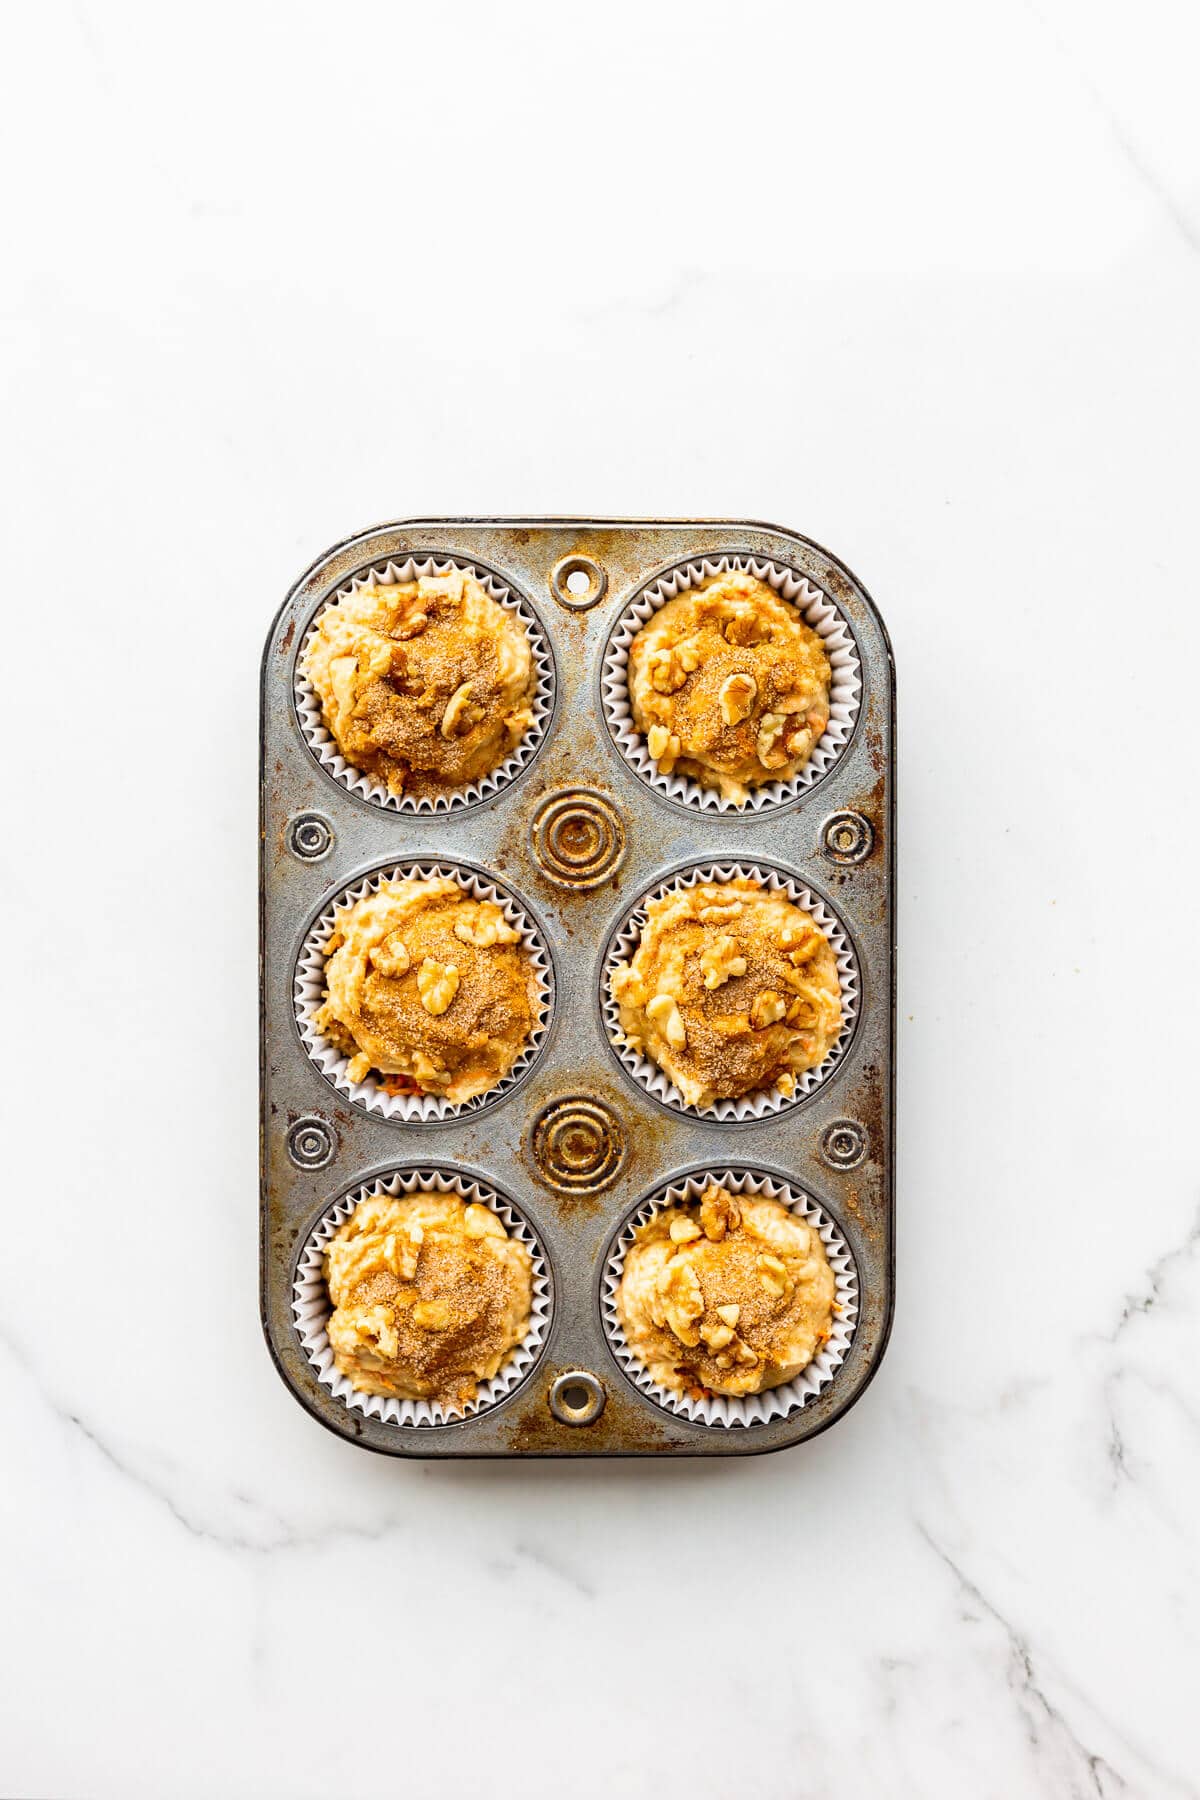 Carrot muffins topped with cinnamon sugar before baking in muffin pan with paper liners.